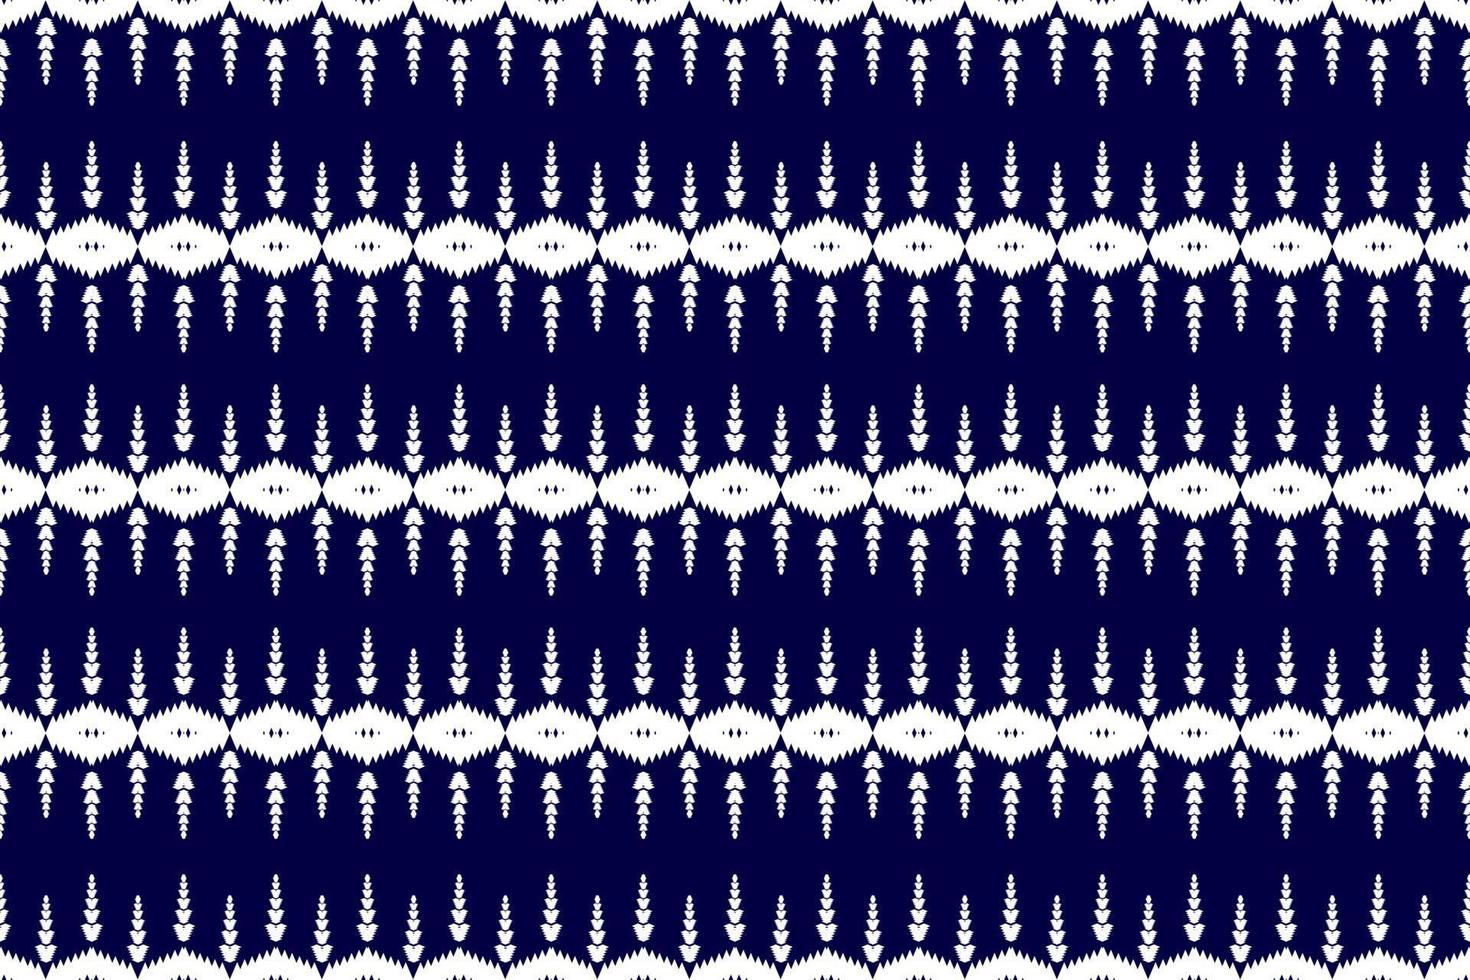 Ikat seamless pattern traditional. Fabric ethnic style. Design for background, wallpaper, vector illustration, fabric, clothing, carpet, textile, batik, embroidery.